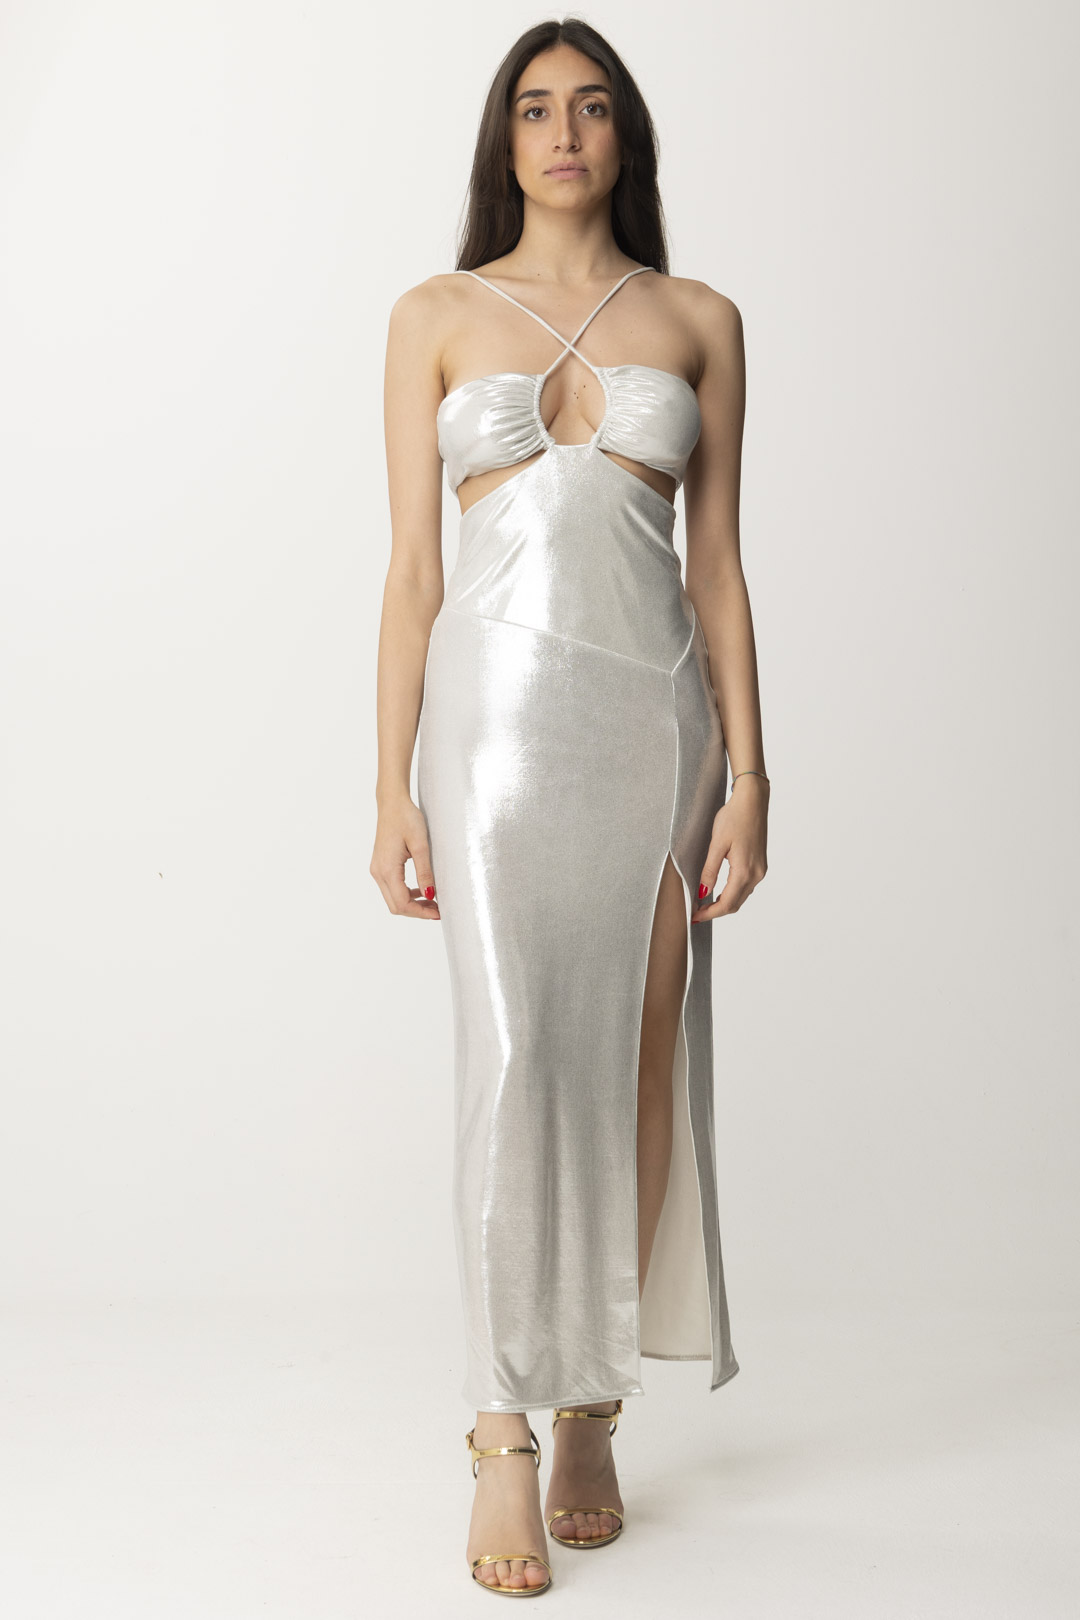 Preview: Patrizia Pepe Dress with Cut-Out in Lamé Jersey ShinyRawWhite